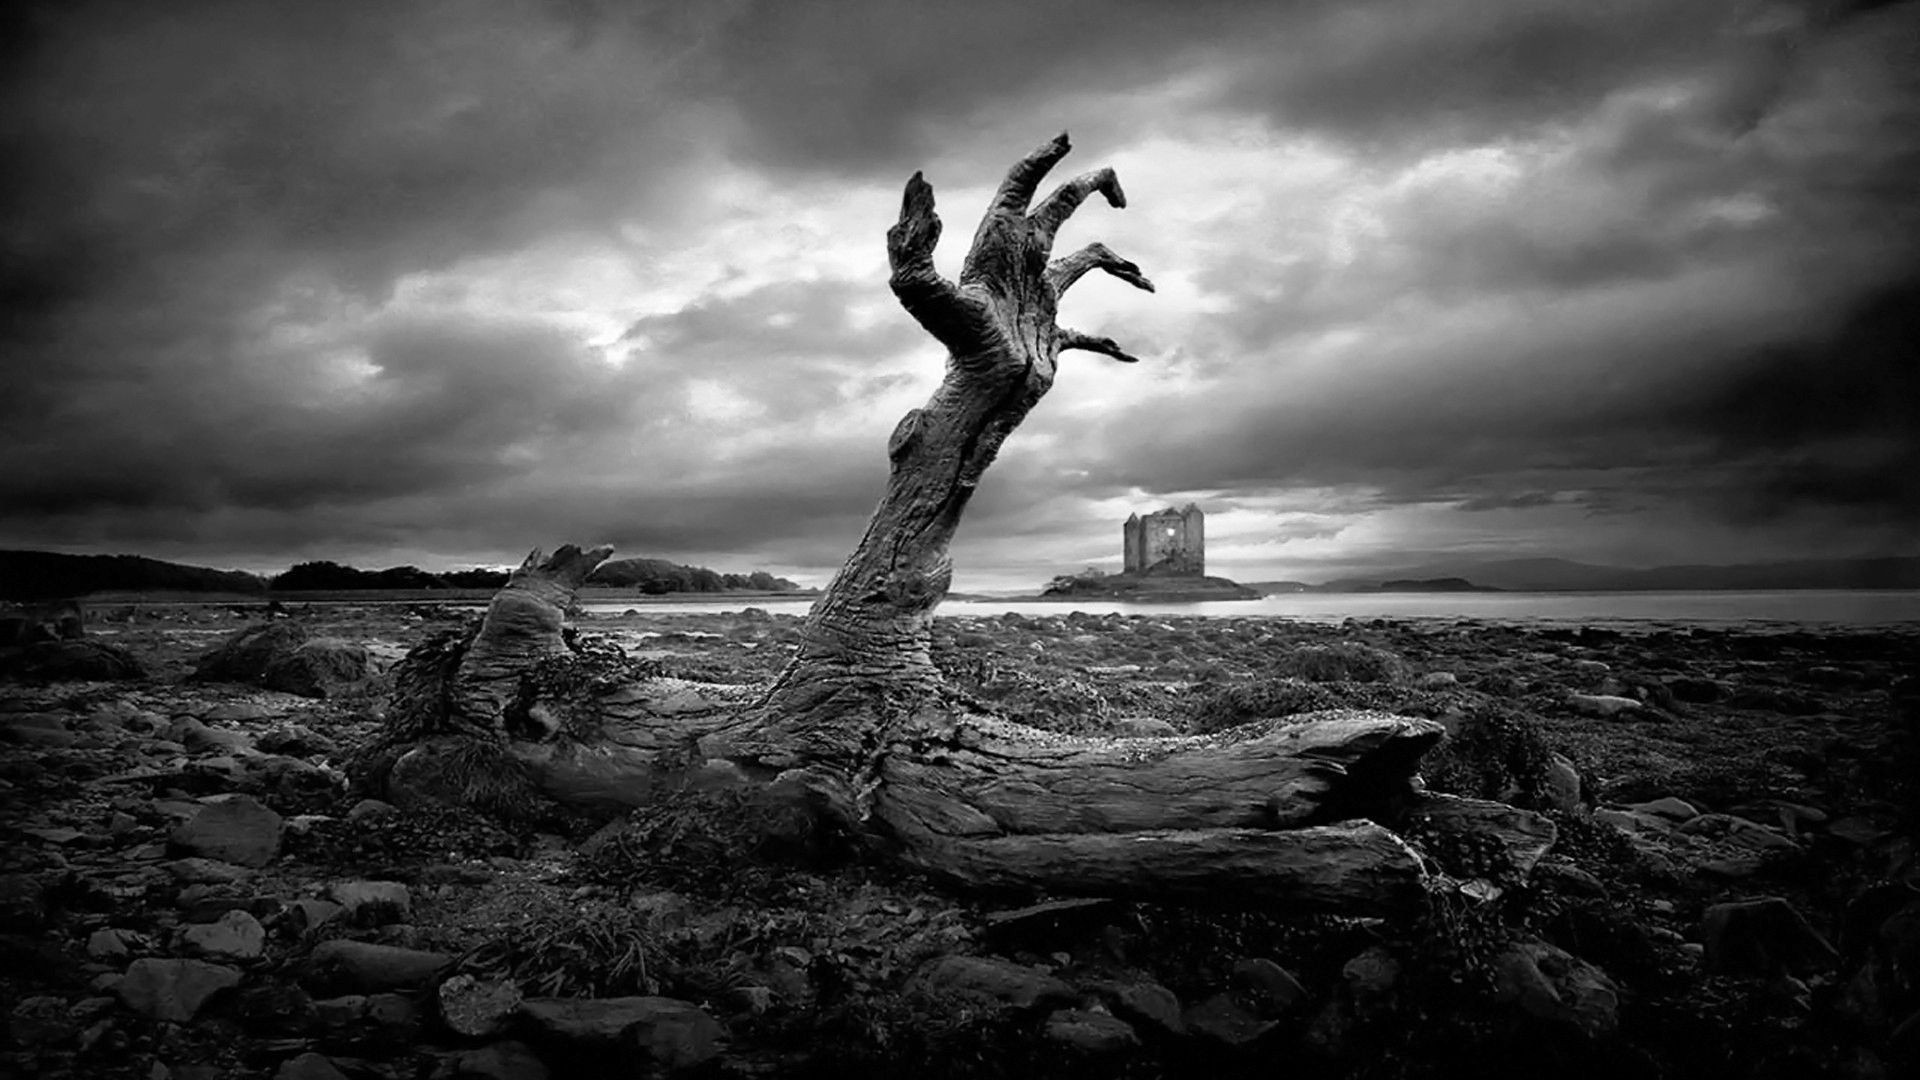 horror wallpaper download,sky,nature,black,black and white,monochrome photography